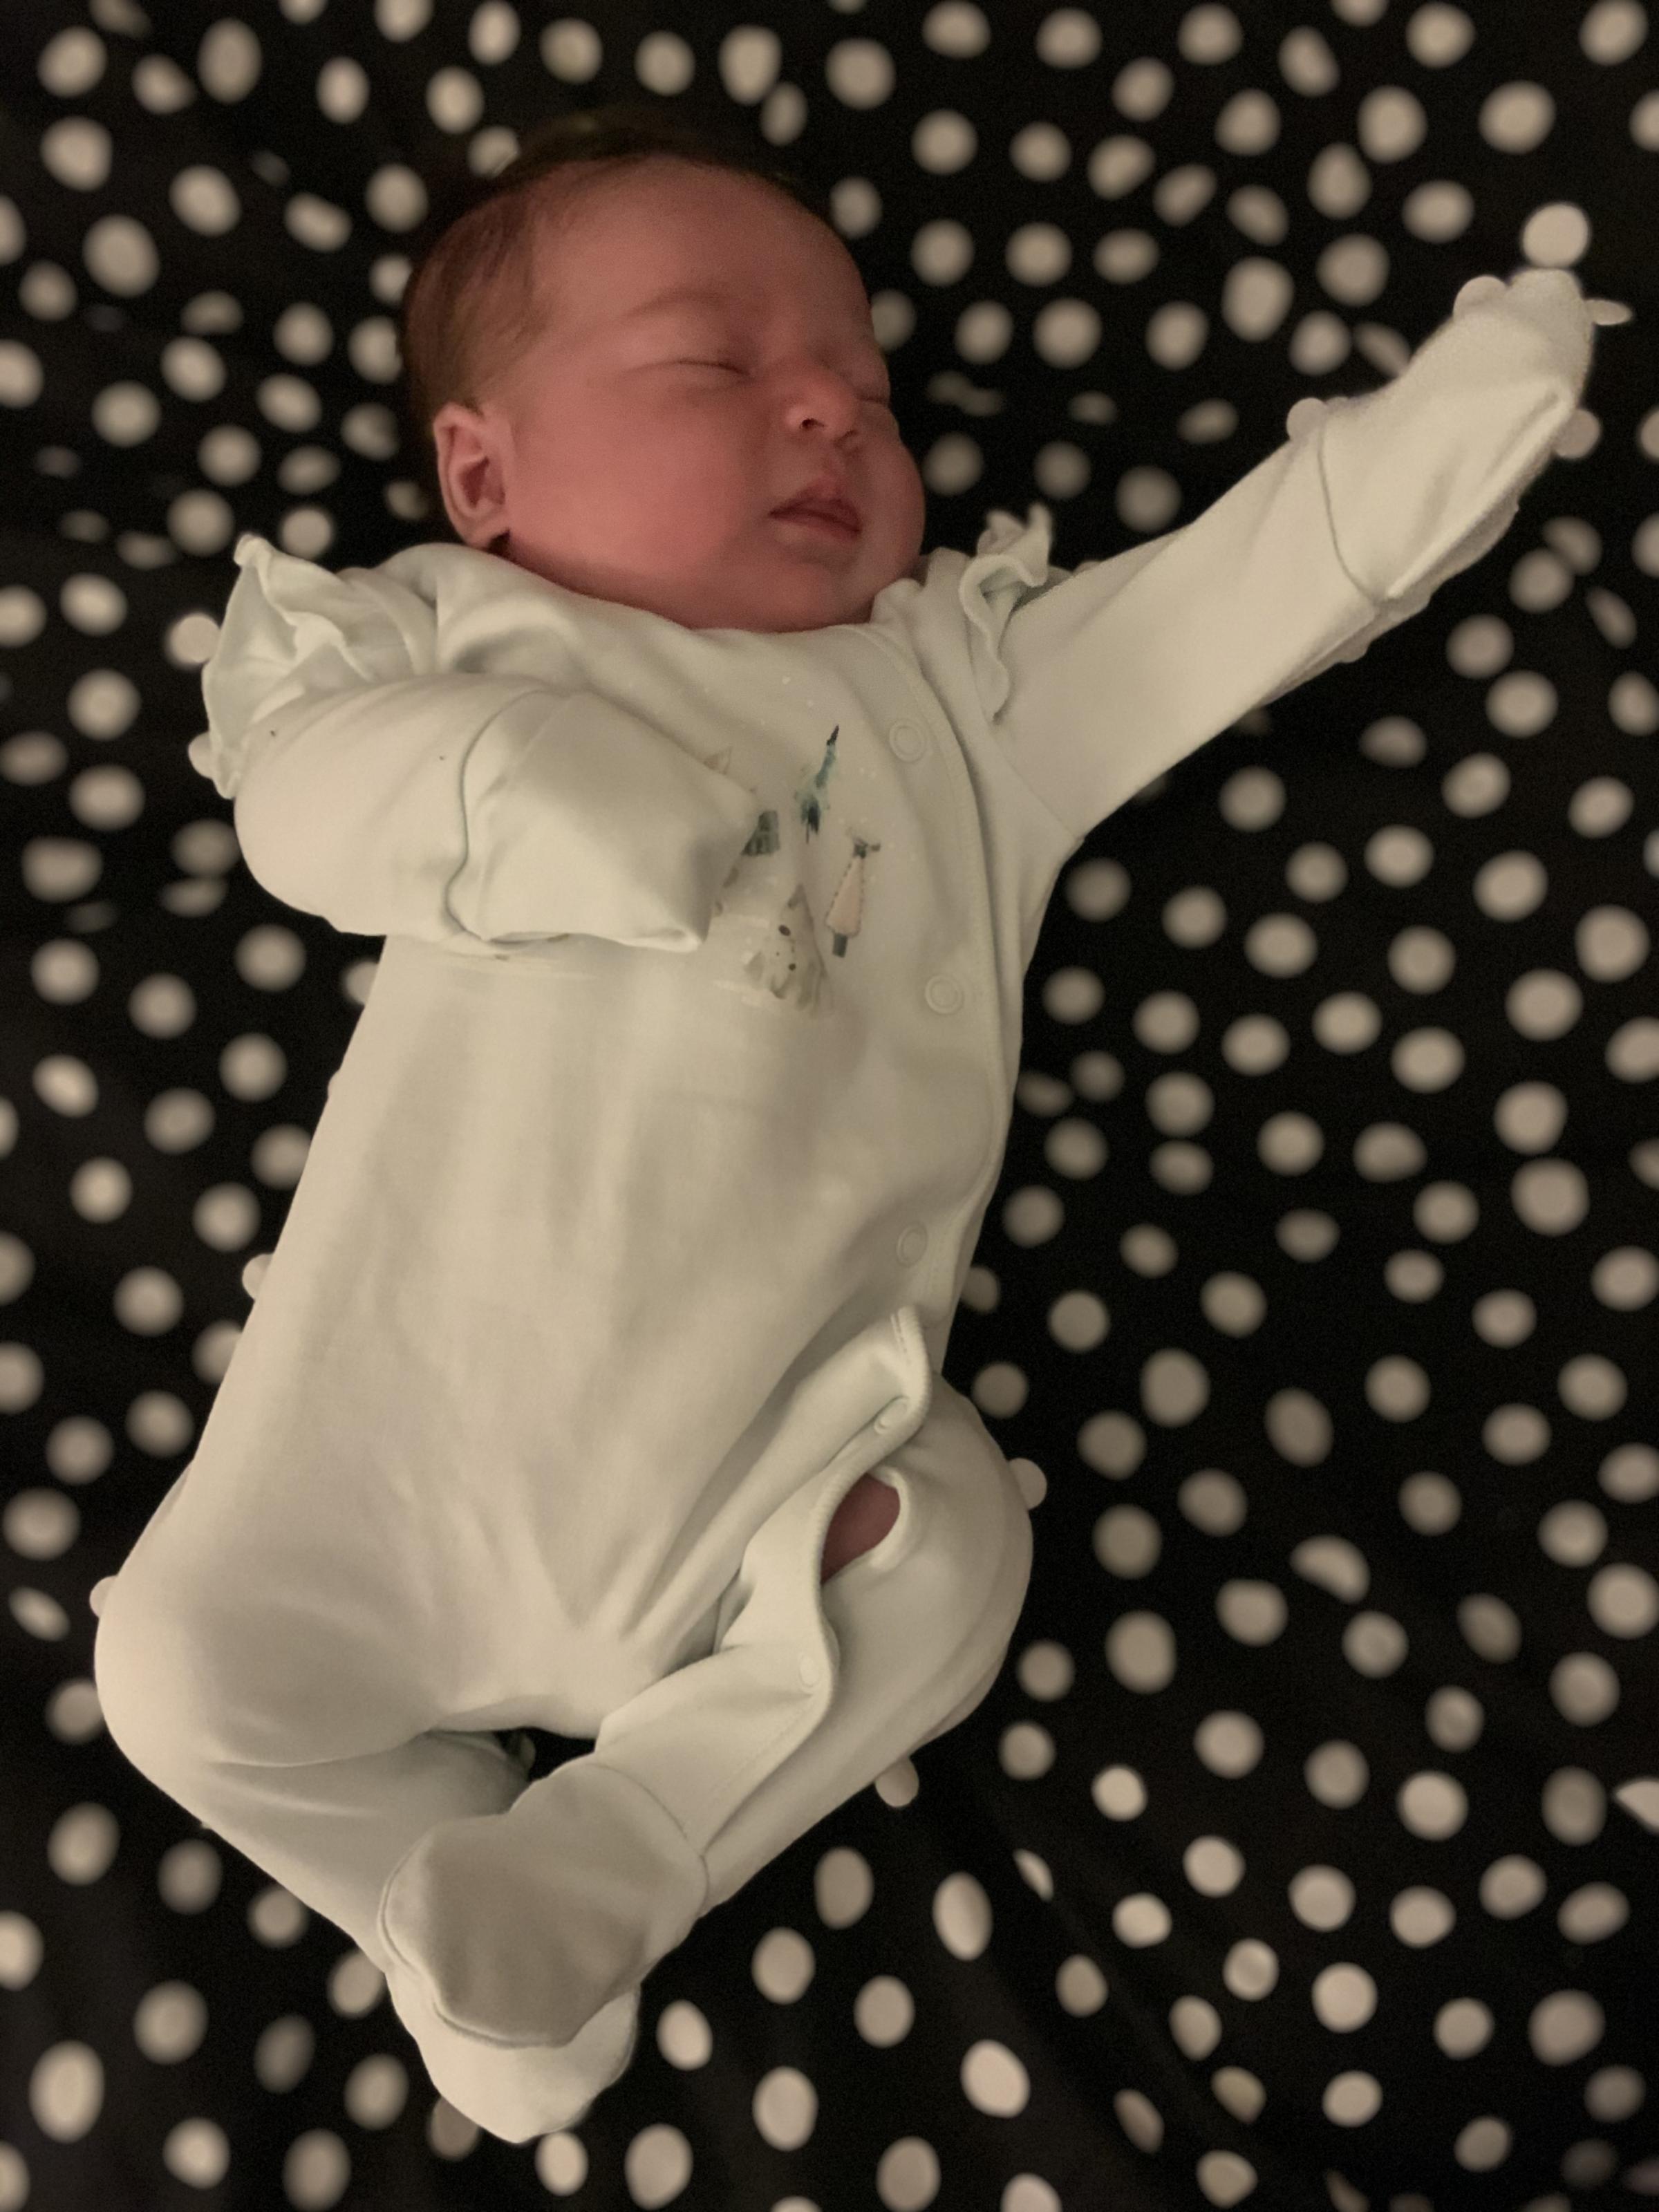 Genevieve Marie Tilley was welcomed into the world at home in Cwmbran after being delivered by her father Mathew on March 15, 2021. She weighed 8lb 2oz. Her parents are Bethan and Mathew Tilley and her big sister is Henrietta (three).